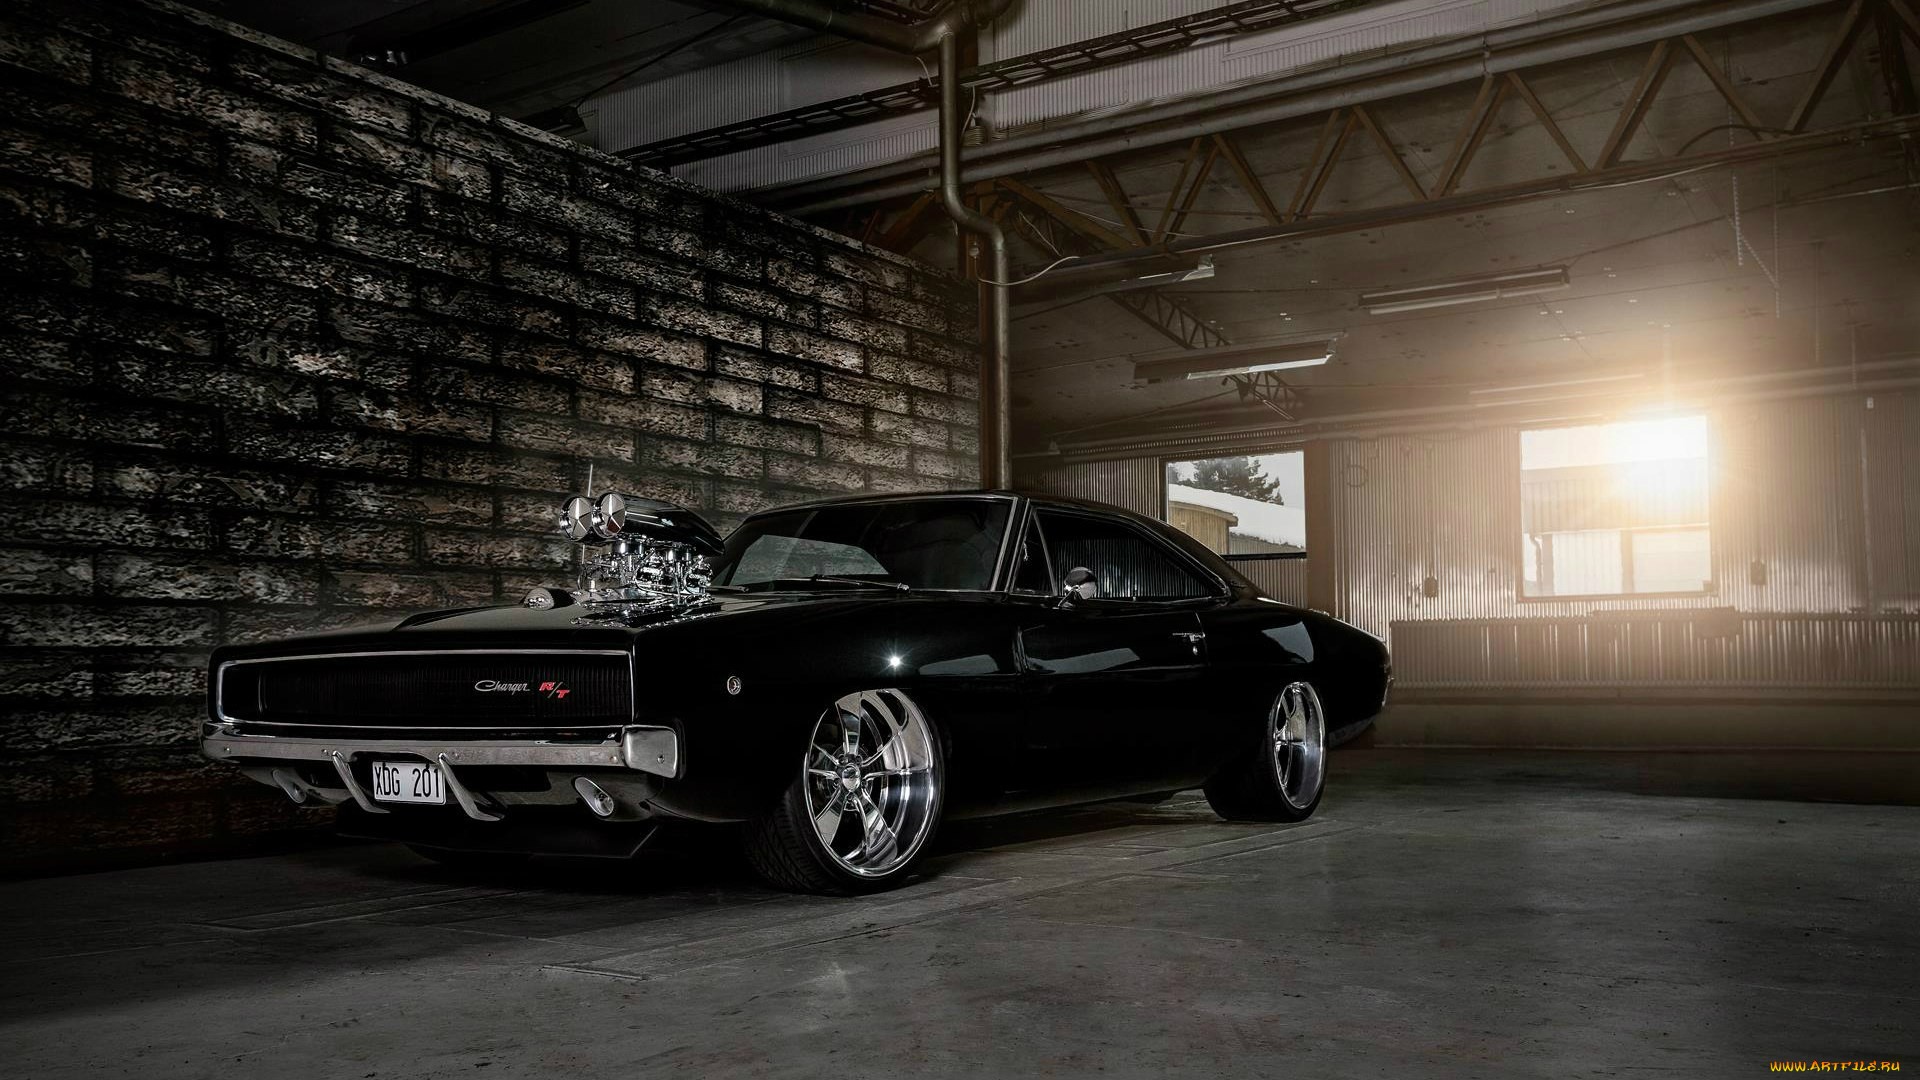 Dodge Charger Fast And Furious Wallpaper Engine Information